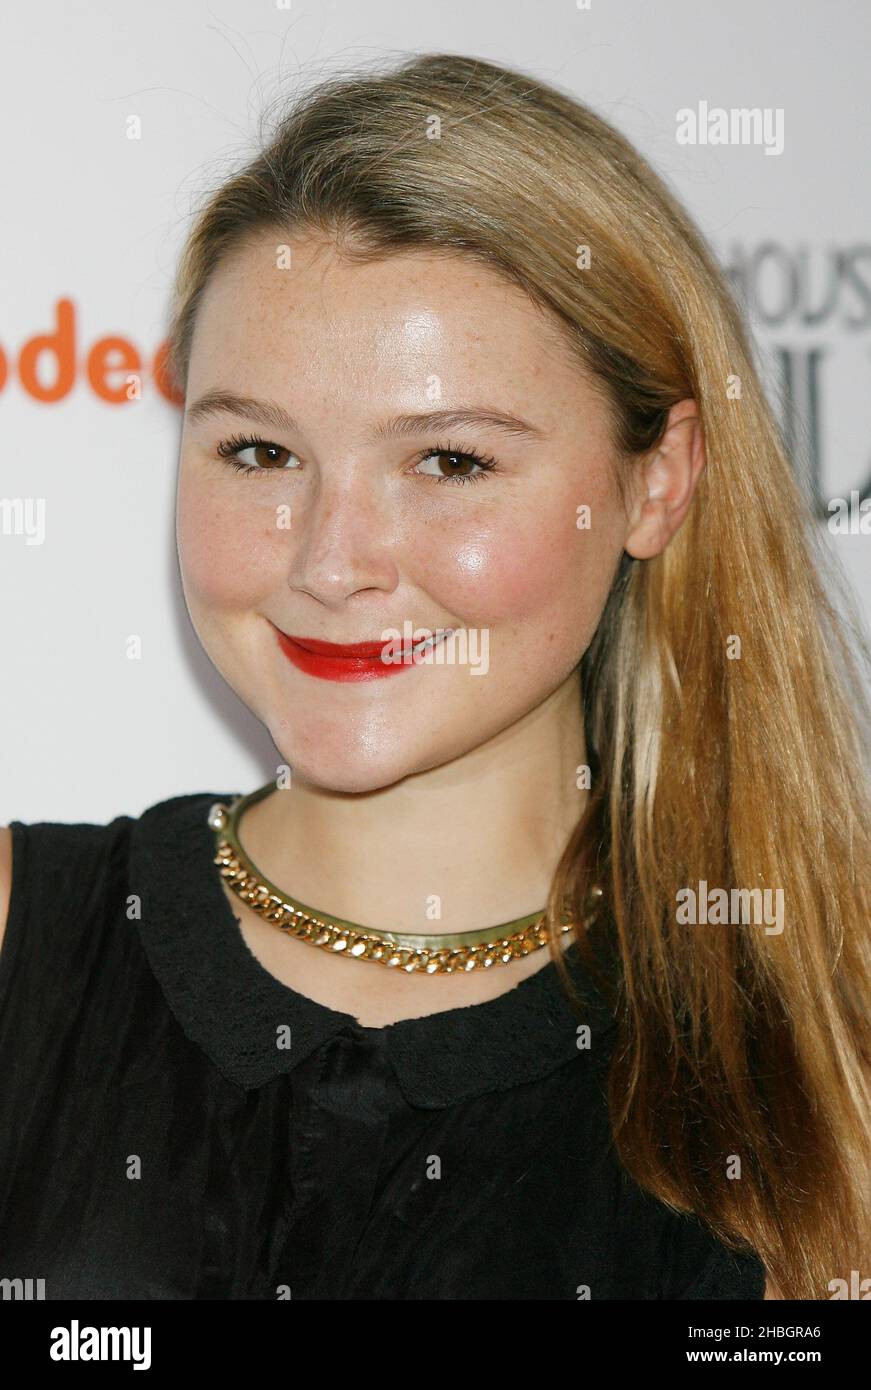 Amber Atherton attends the NickelodeonÕs House of Anubis Season 2 Premiere in association with Childline, at the Freemasons Hall in Covent Garden, London. Stock Photo